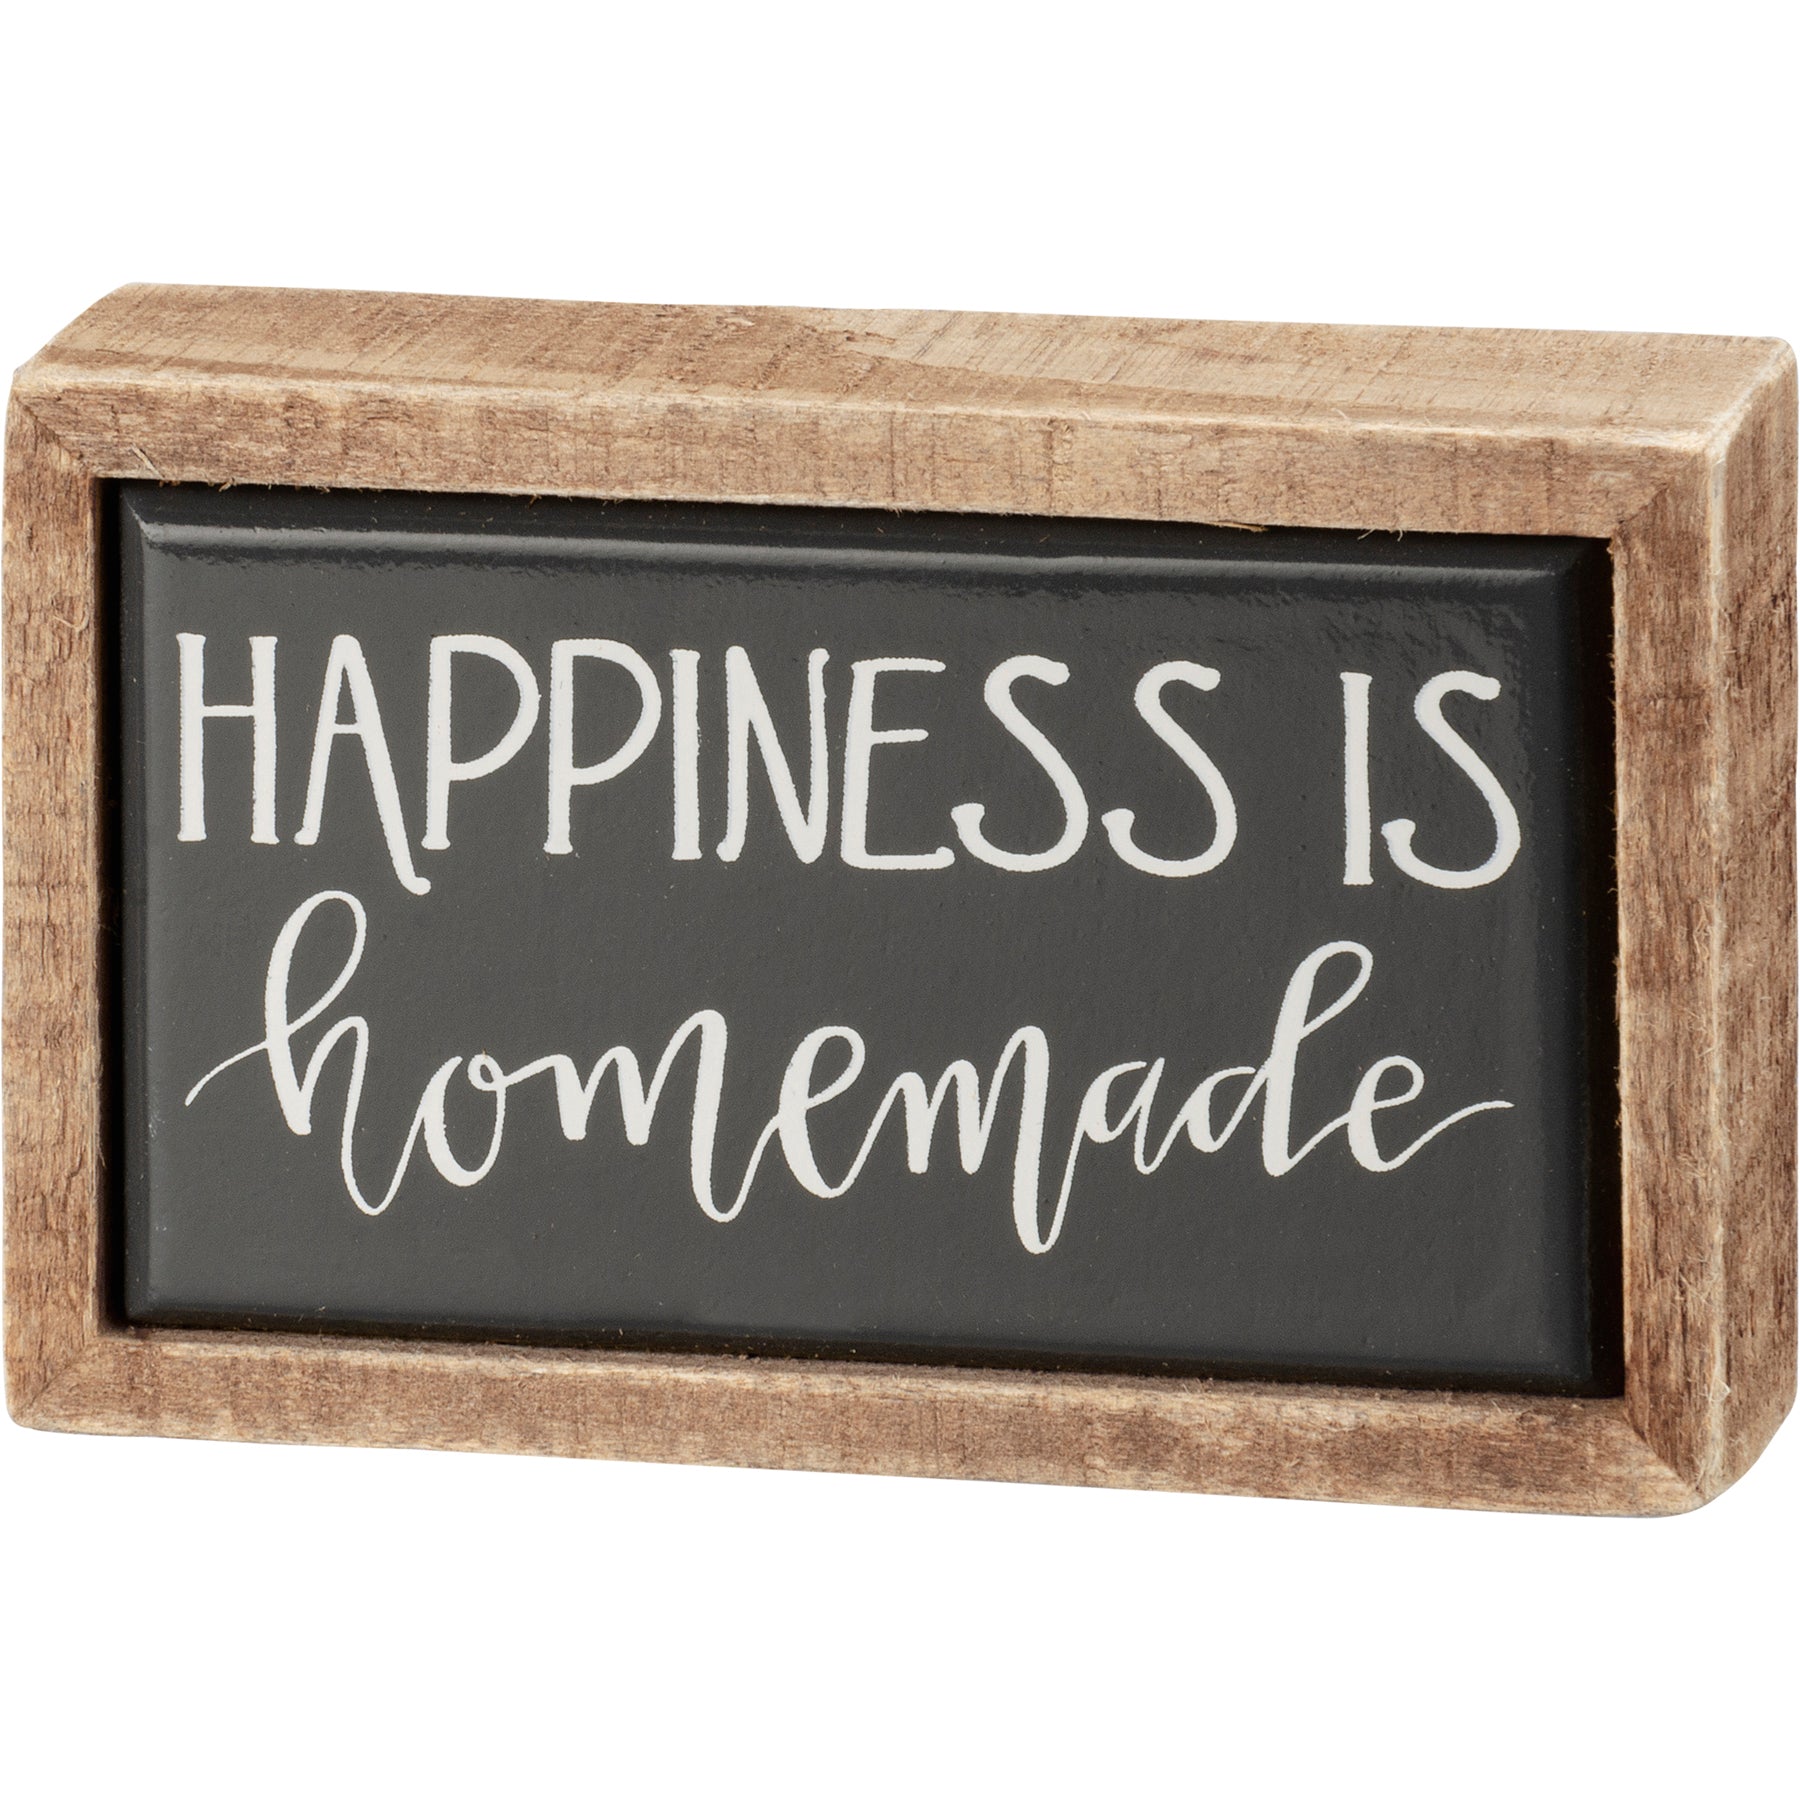 Happiness is homemade mini wooden box sign 